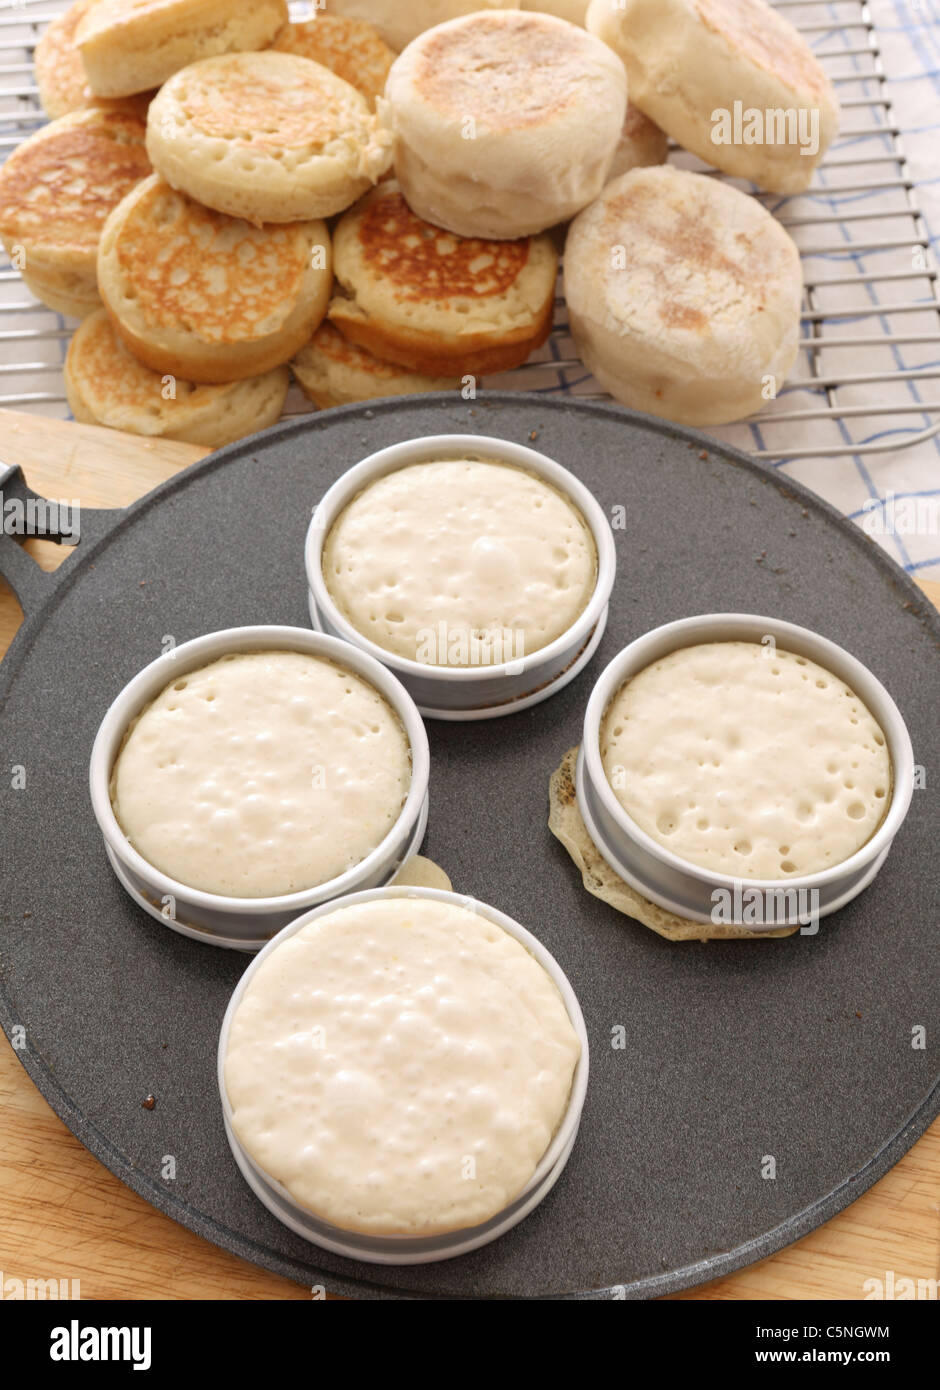 Baking traditional English crumpets in rings on a hot griddle, with a pile of homemade crumpet and muffins in the background Stock Photo